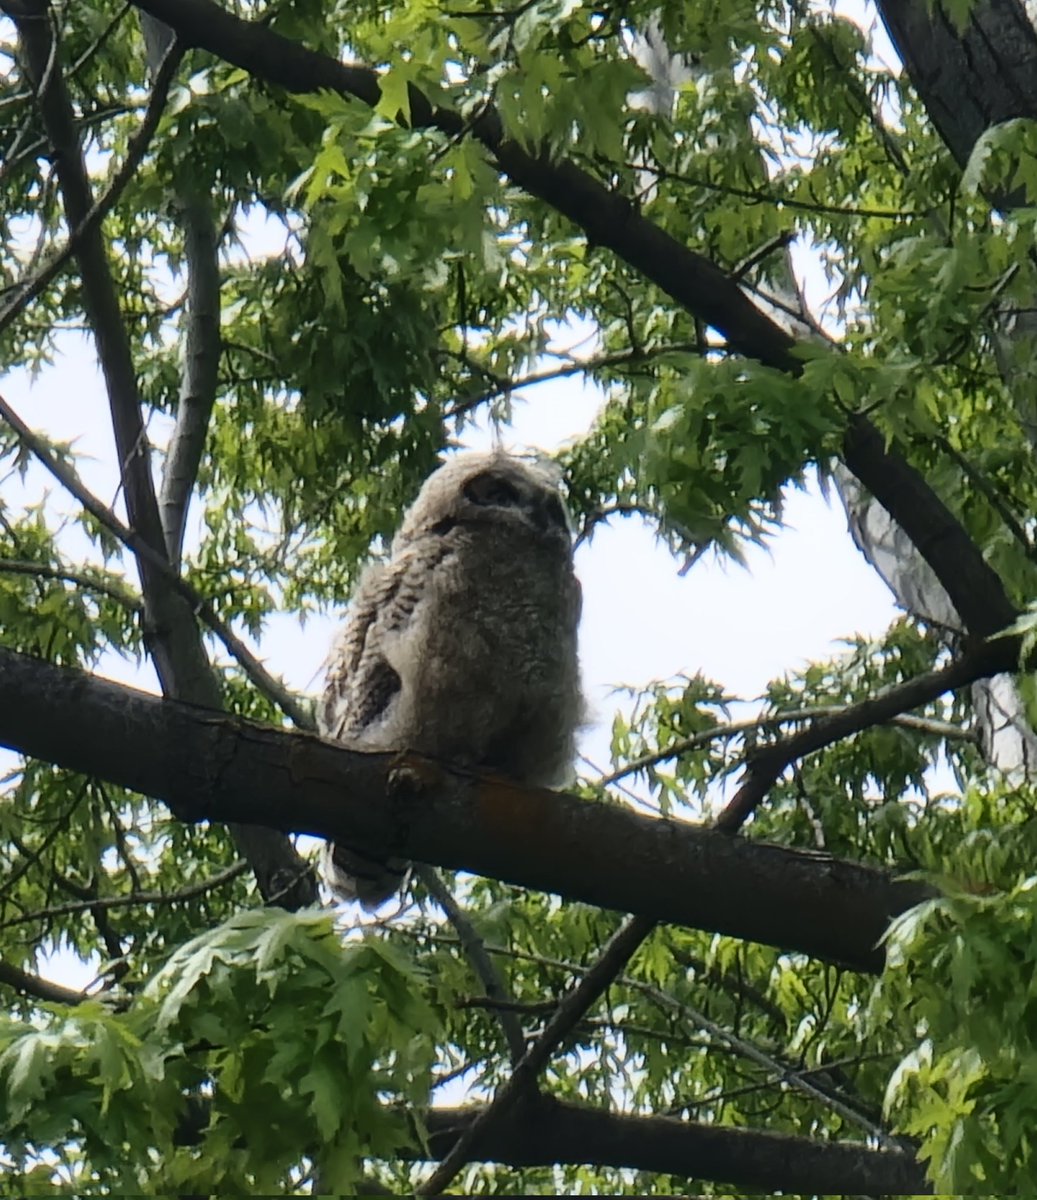 It's the baby Great Horned Owl!!!  He's very fluffy and was being harassed by the crows. I could hear Mama owl hooting from a nearby tree. I'm so damn excited to have gotten a pic. He's glorious!!! 😍😍